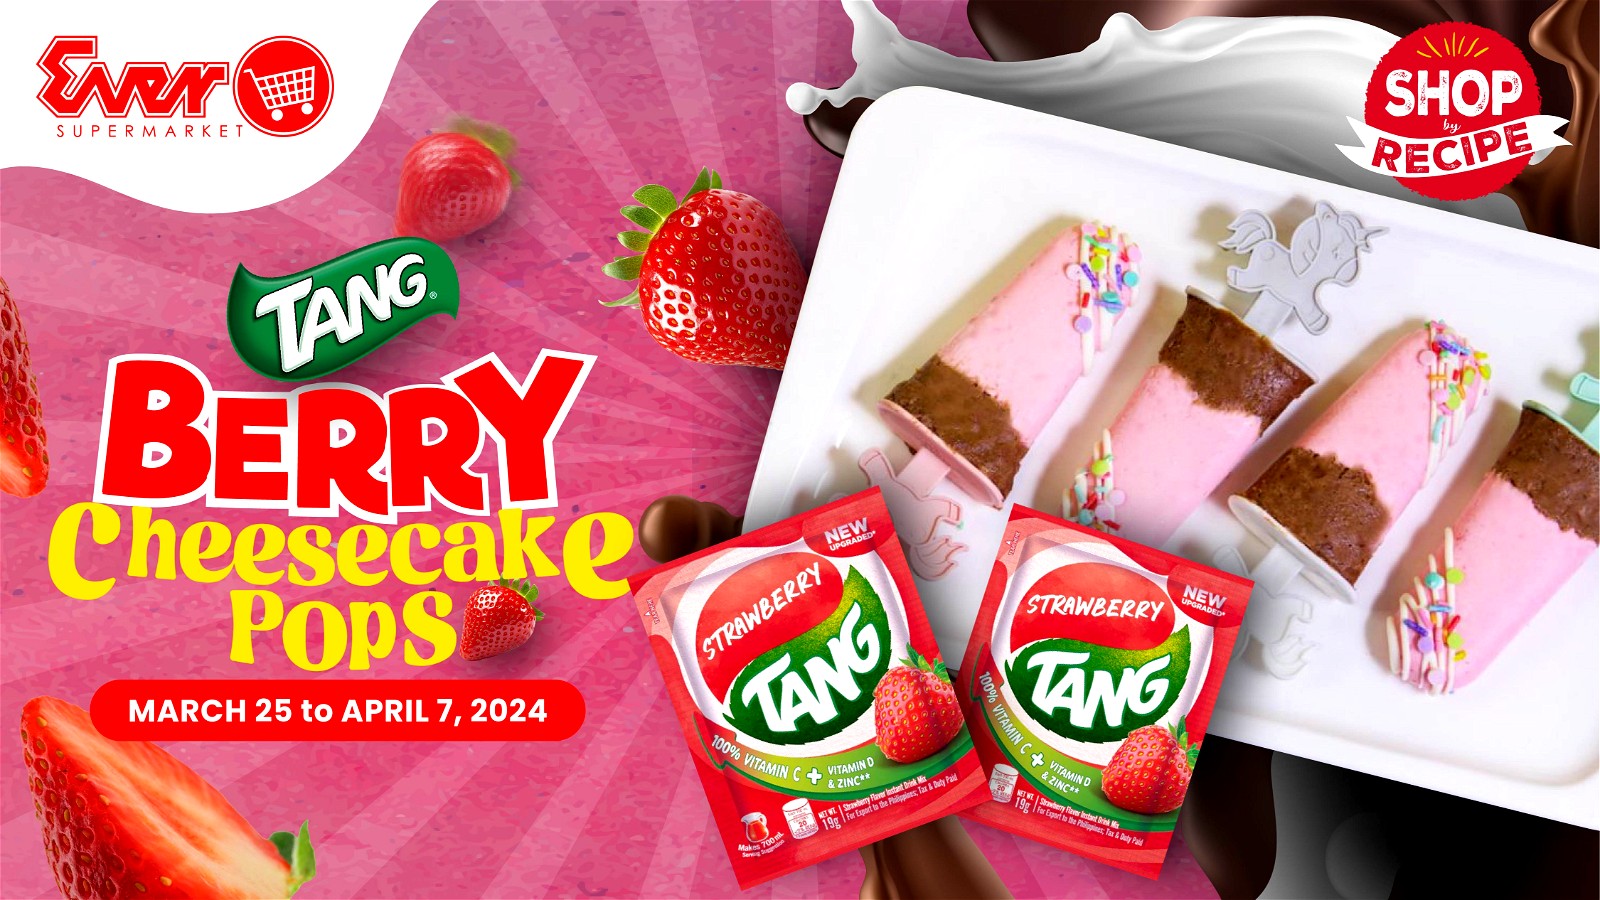 Image of Tang Berry Cheesecake Pops.